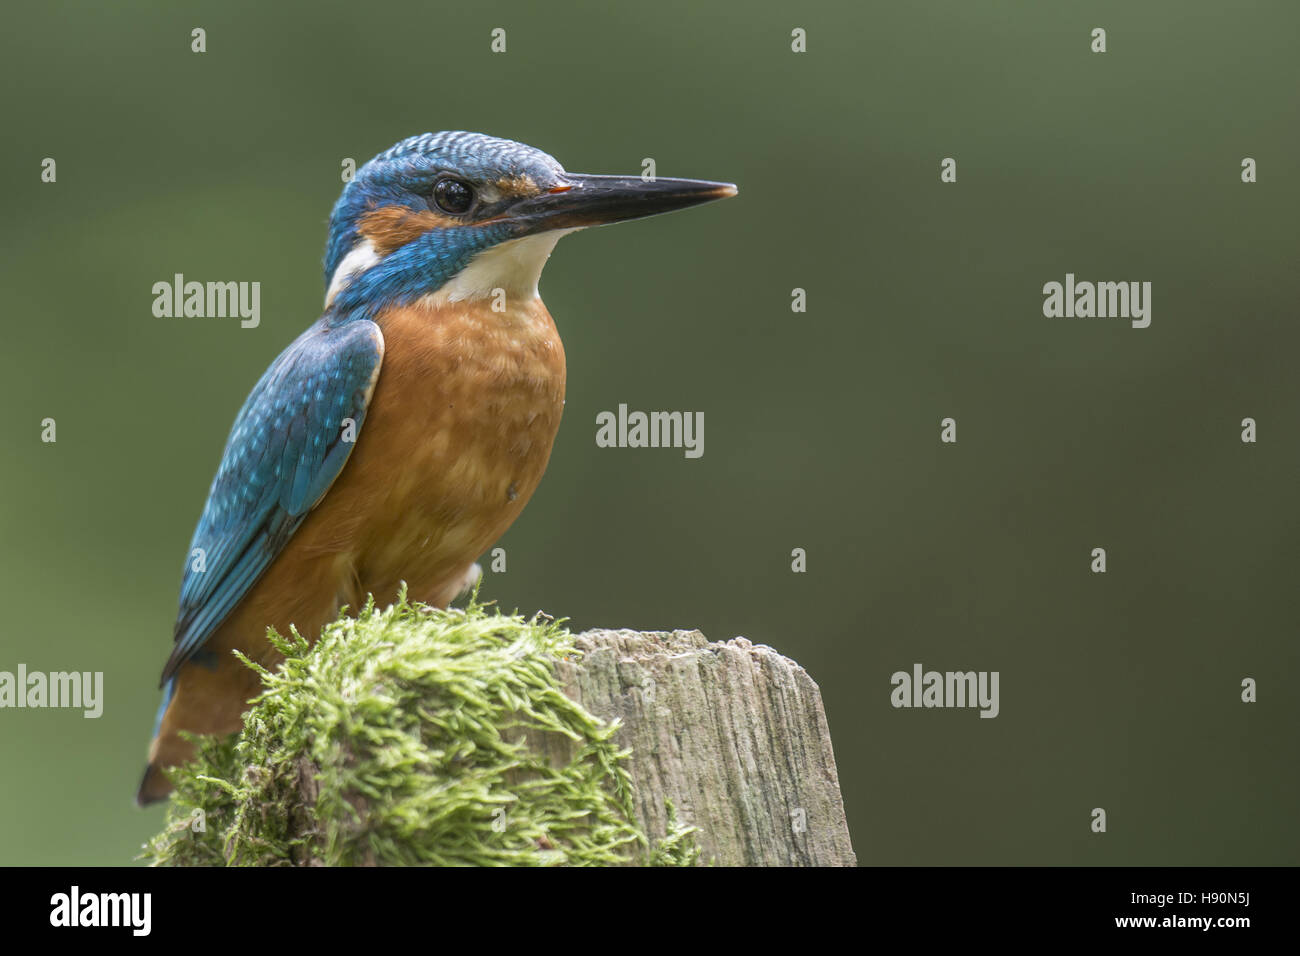 Kingfisher Alcedo atthis, commune, bad iburg, Basse-Saxe, Allemagne Banque D'Images